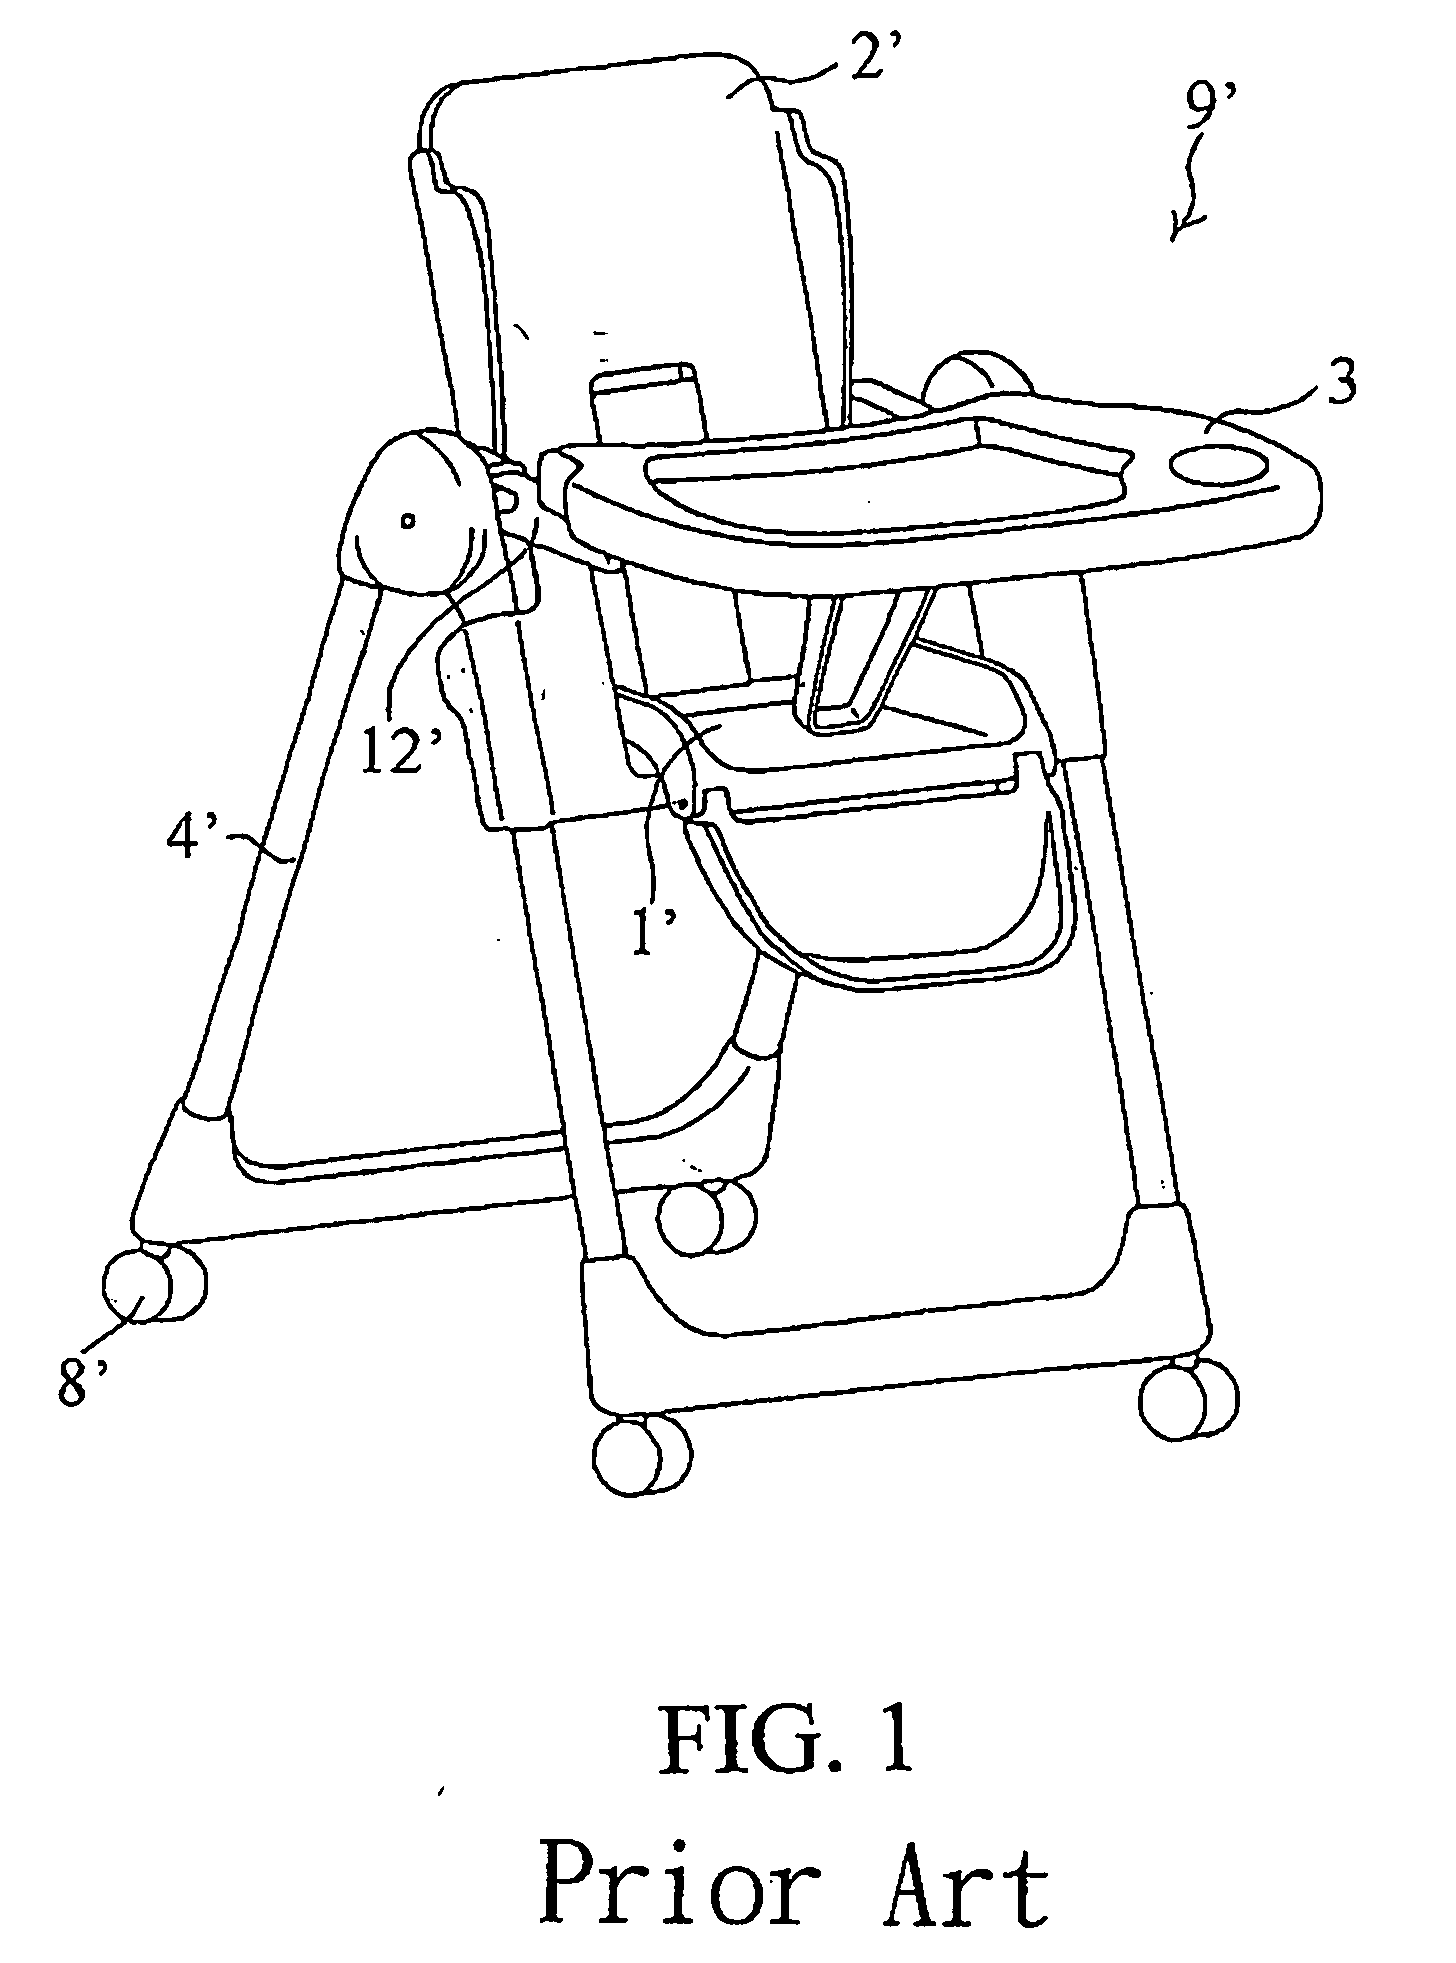 Collapsible high chair for children